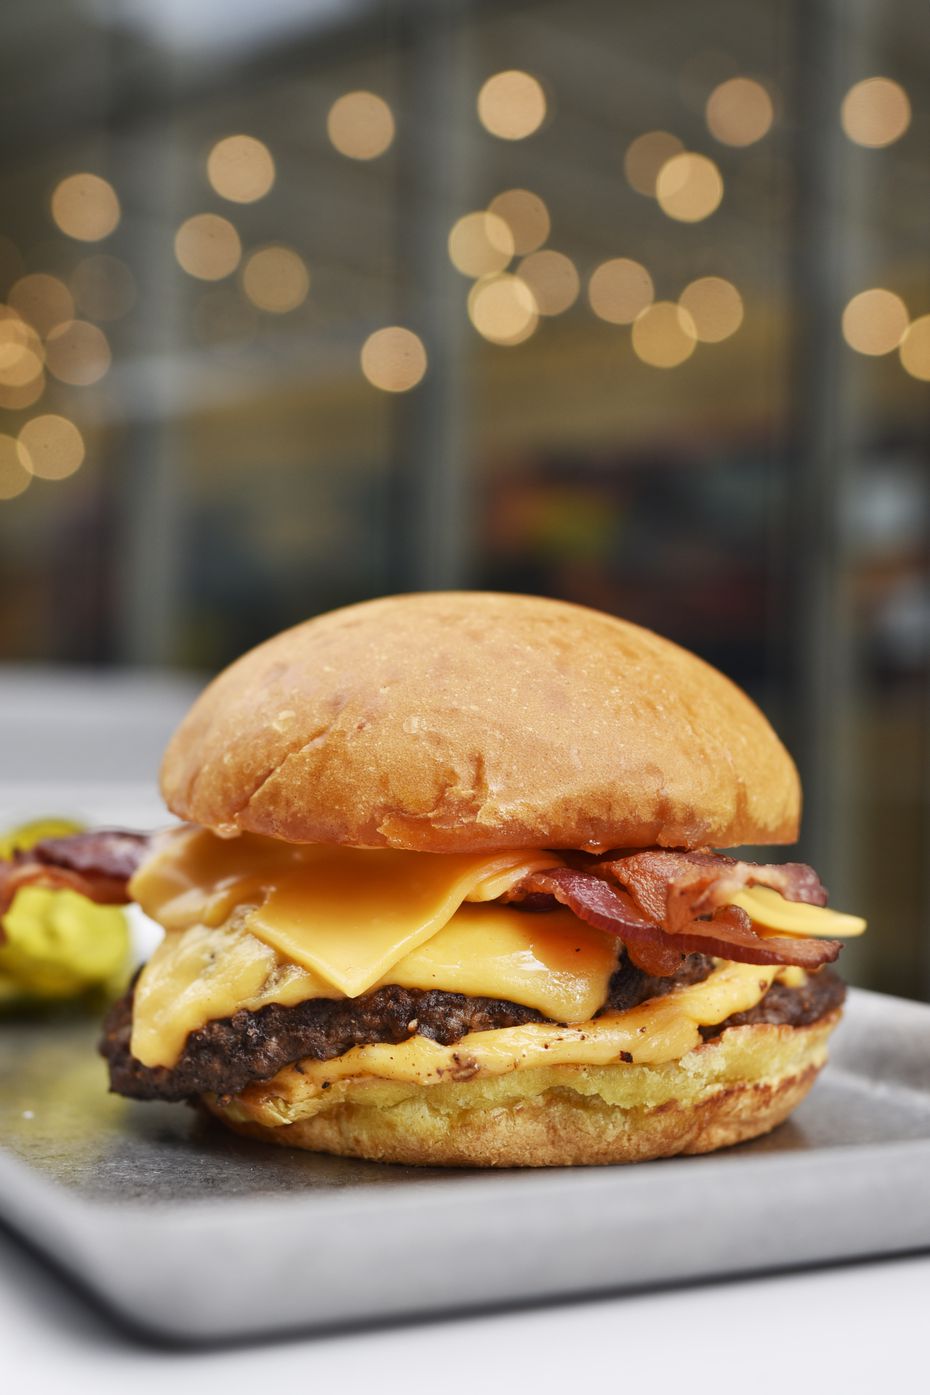 The burger at Ellie's is topped with smoked bacon, cheese and pickles.